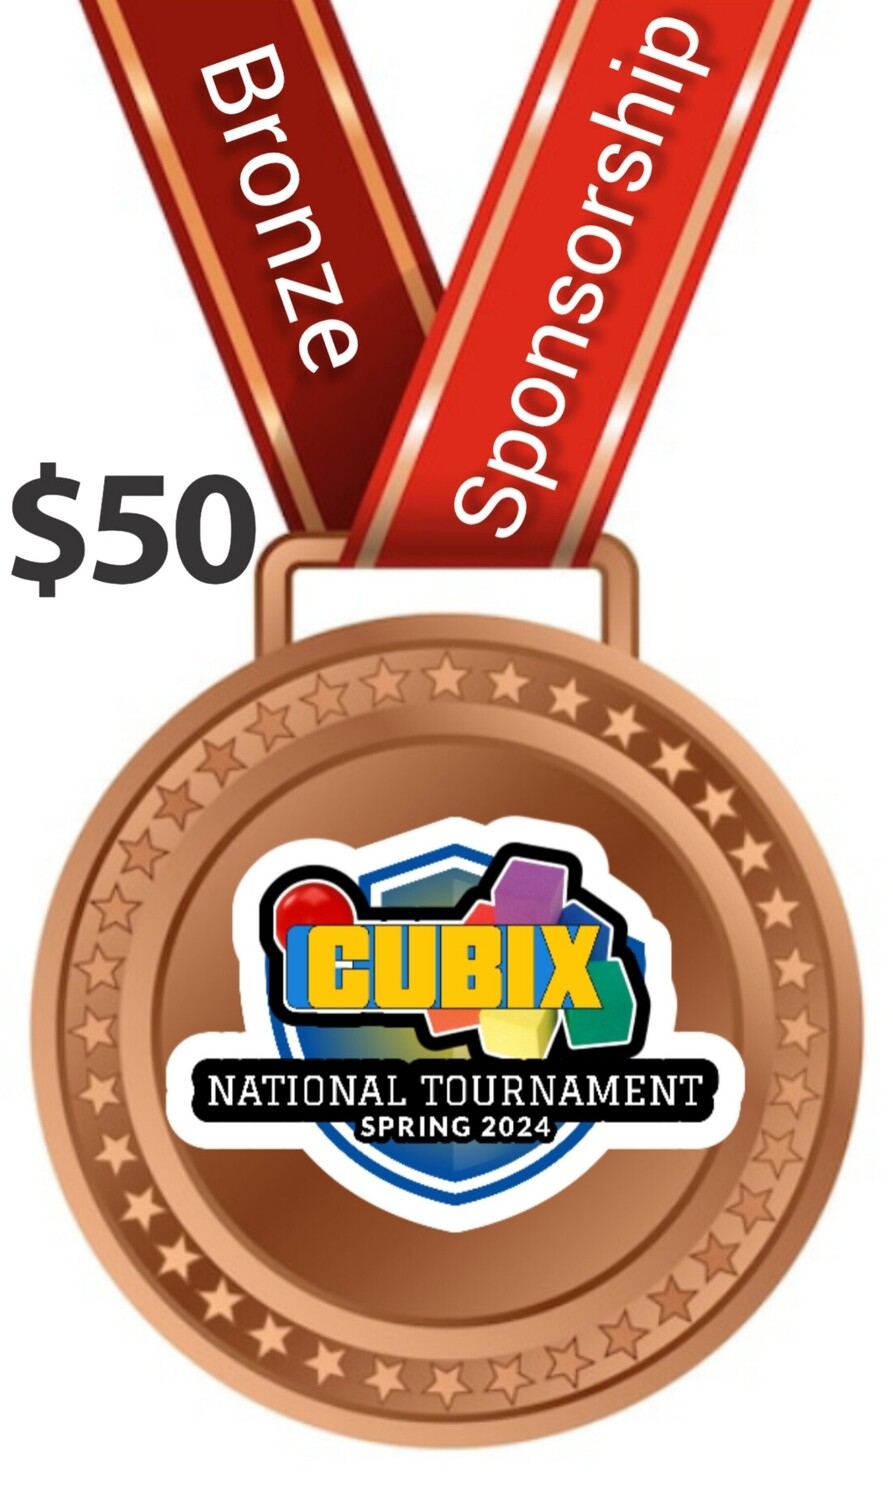 Cubix 2nd Annual Tournament Sponsorship Package A